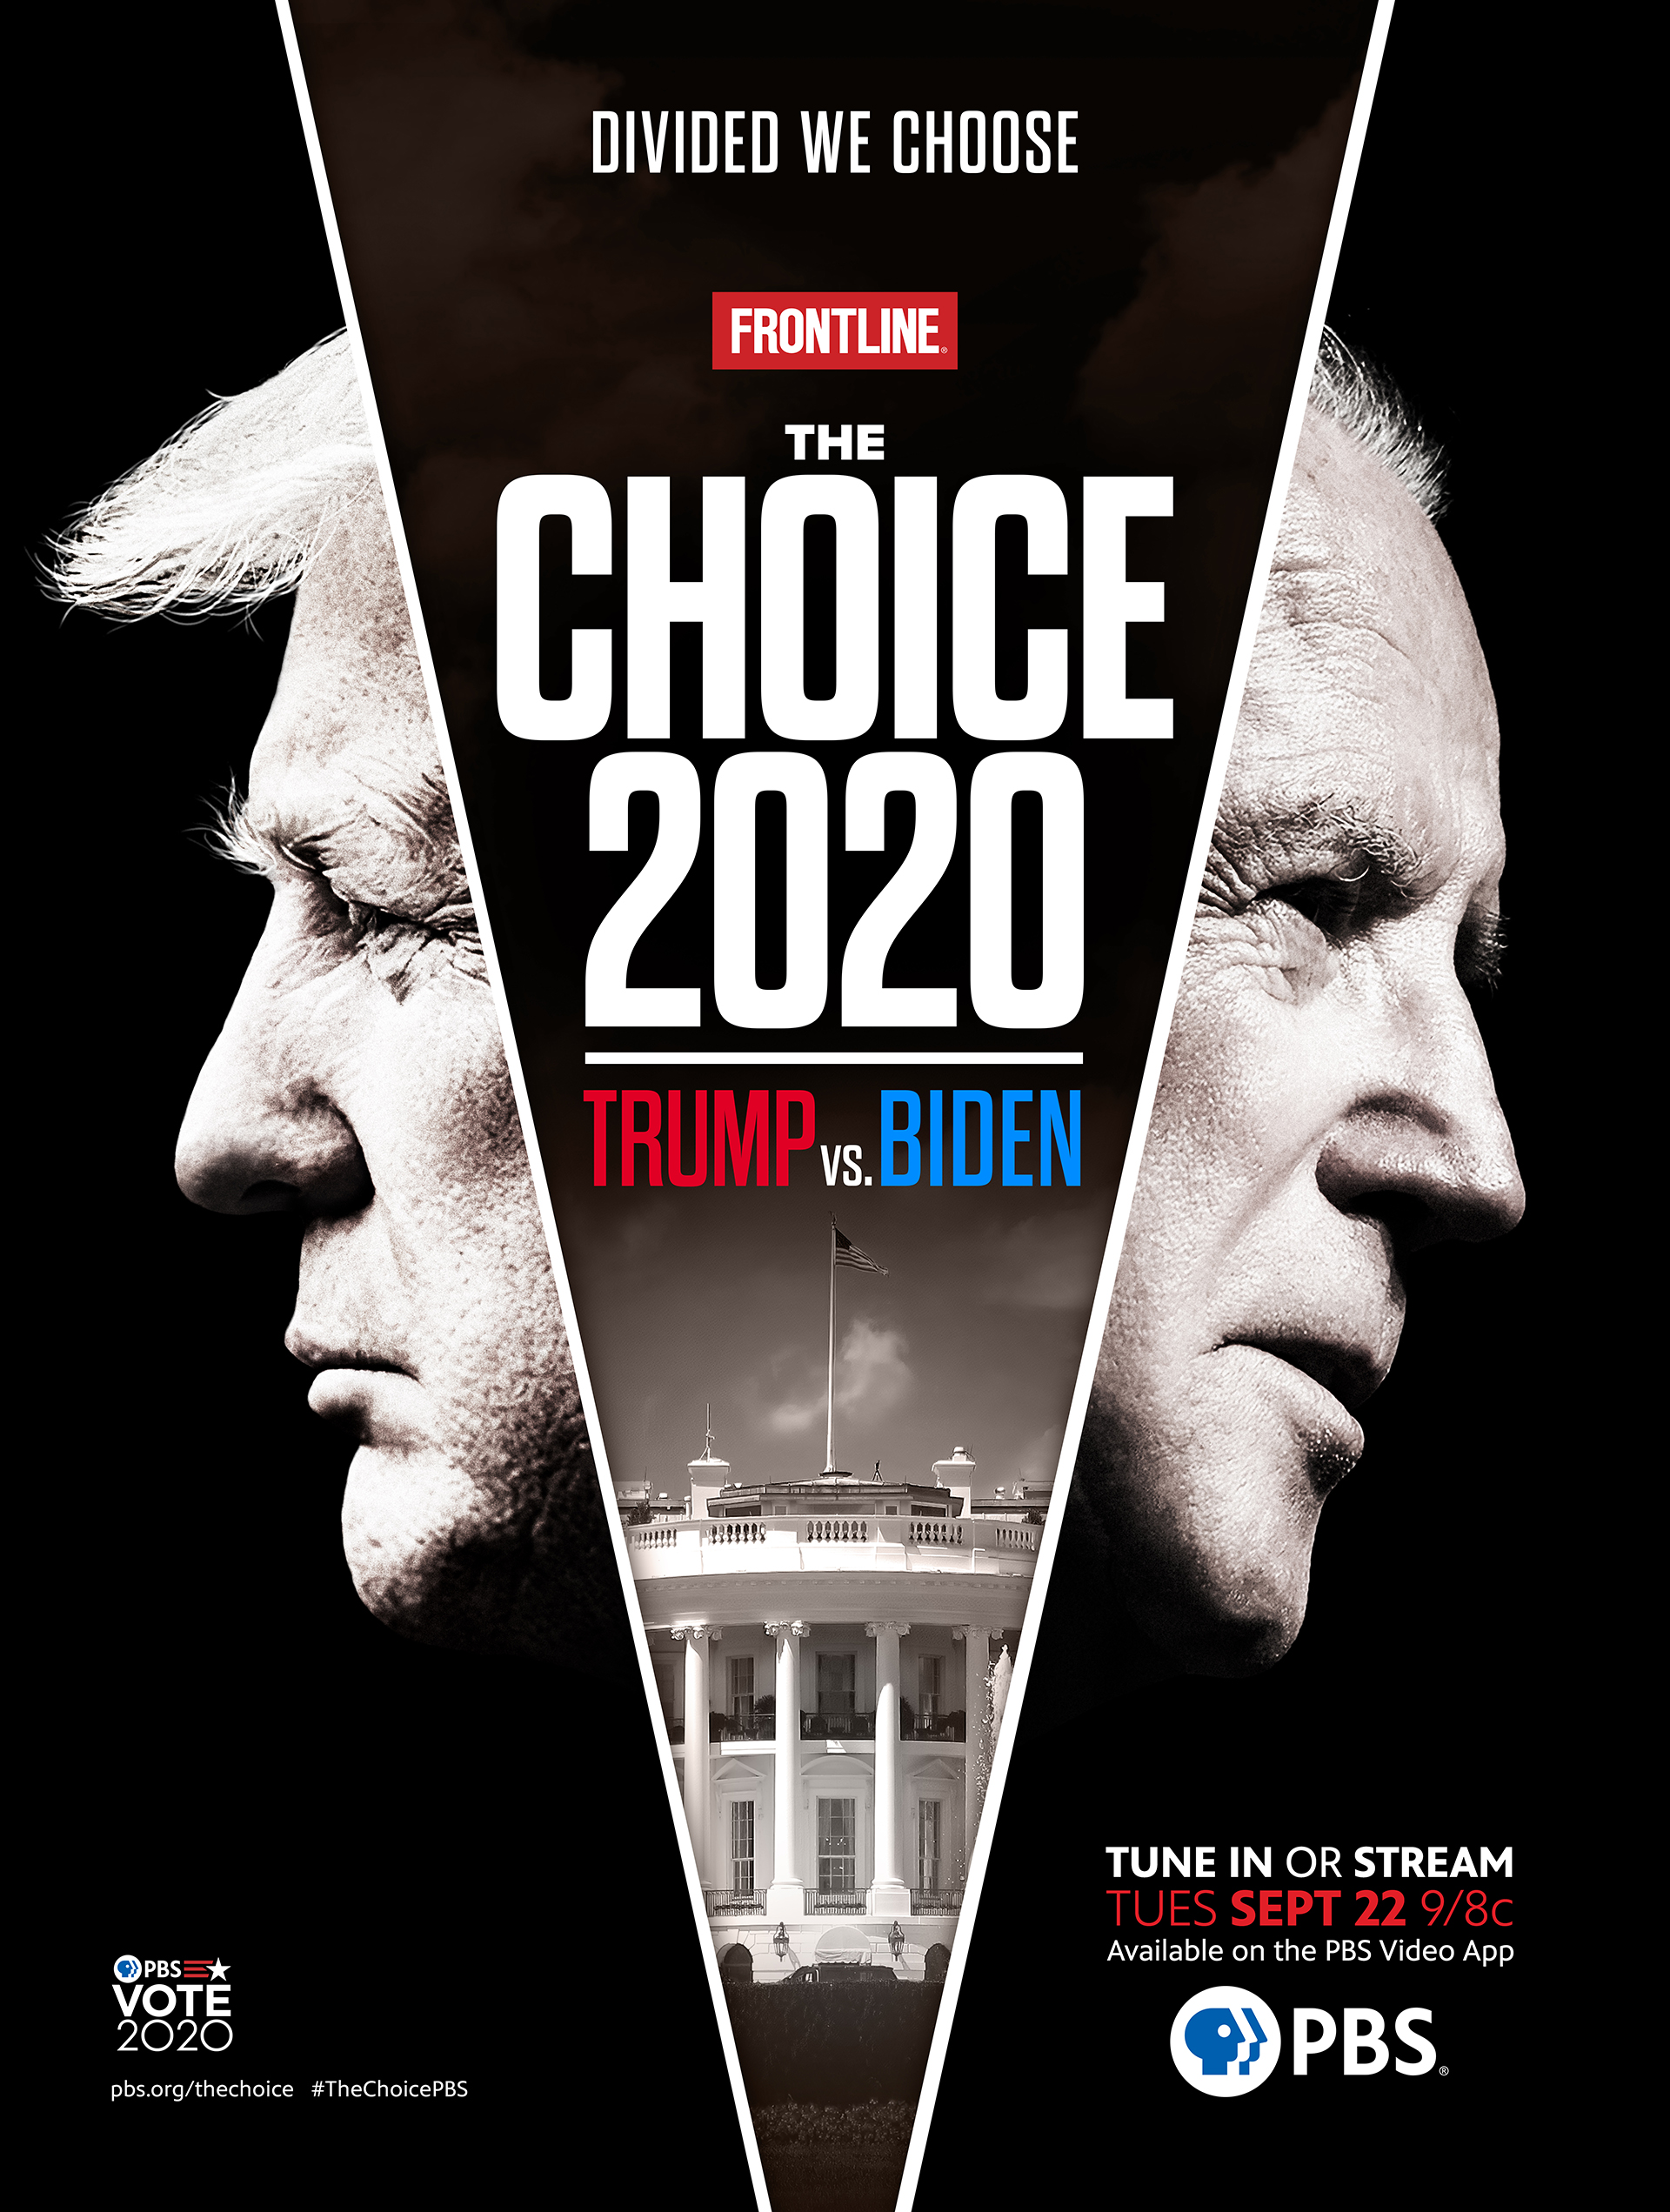 Promotional poster for THE CHOICE 2020: TRUMP VS BIDEN